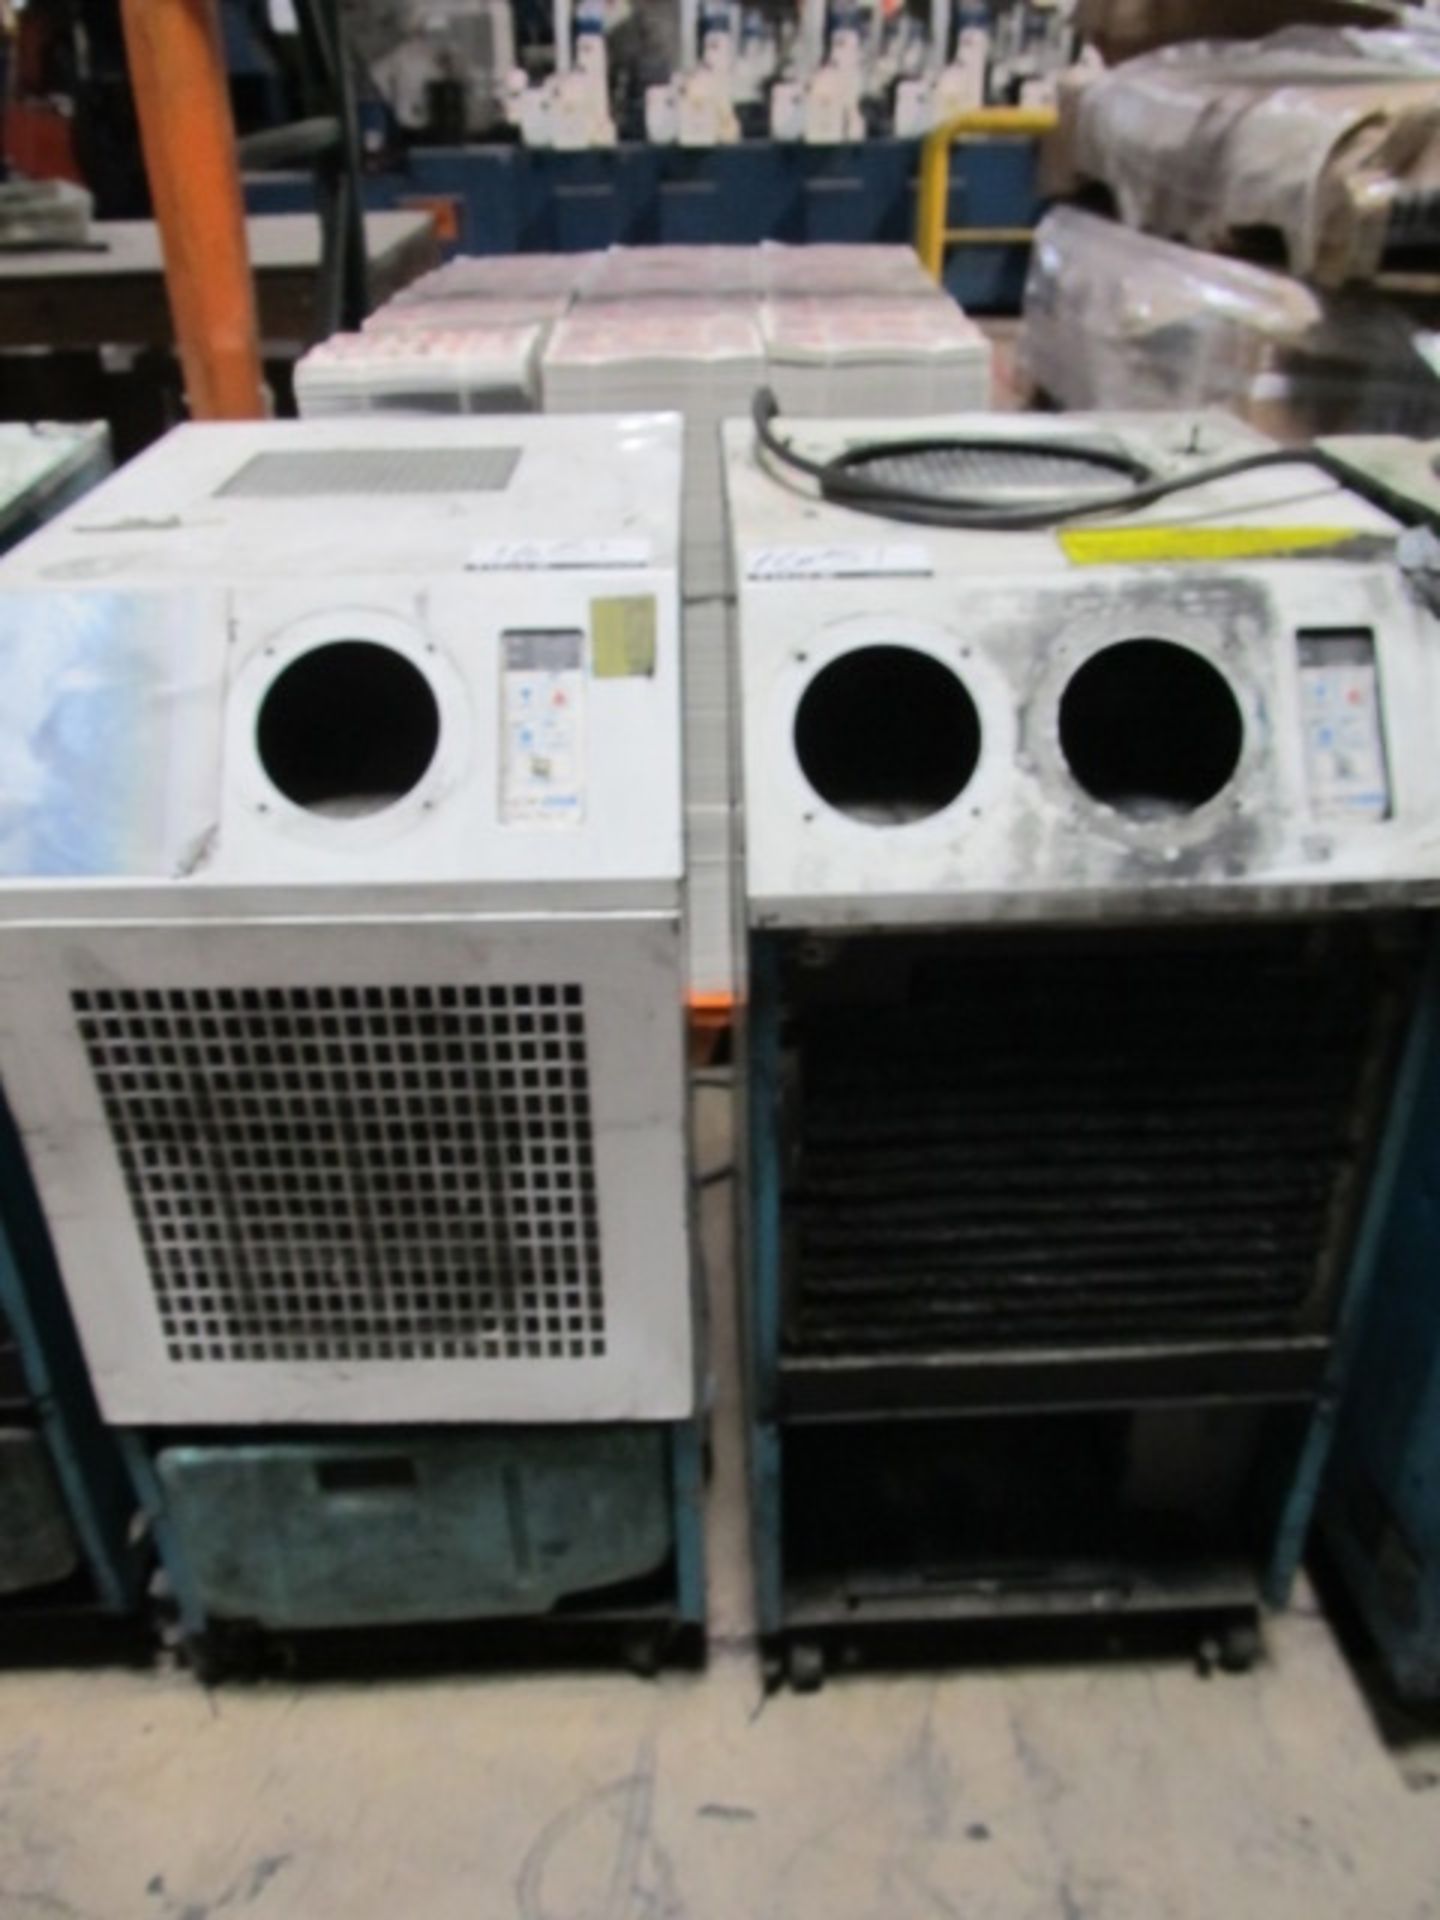 Lot (2) Movin Cool Portable Spot Cooling System, Model Classic Plus 14. Asset Location: West